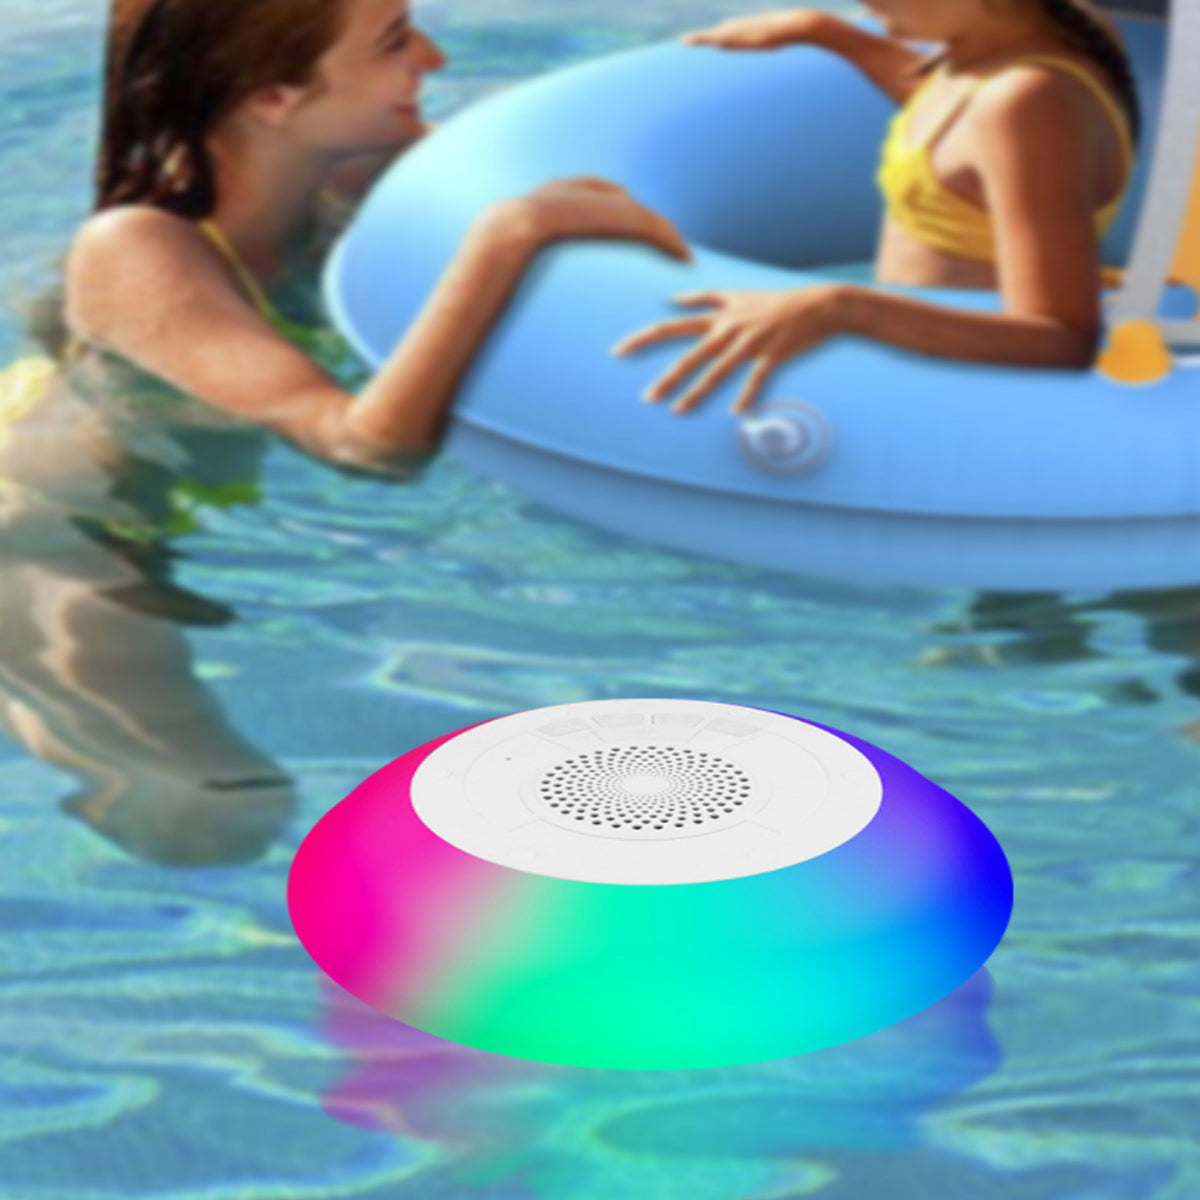 Floatilla Bluetooth LED Enabled Waterproof Speaker For Pools And Outdoors - 4522273_large_f60e3d39-3c6a-4306-a81a-40c7747dd1c6